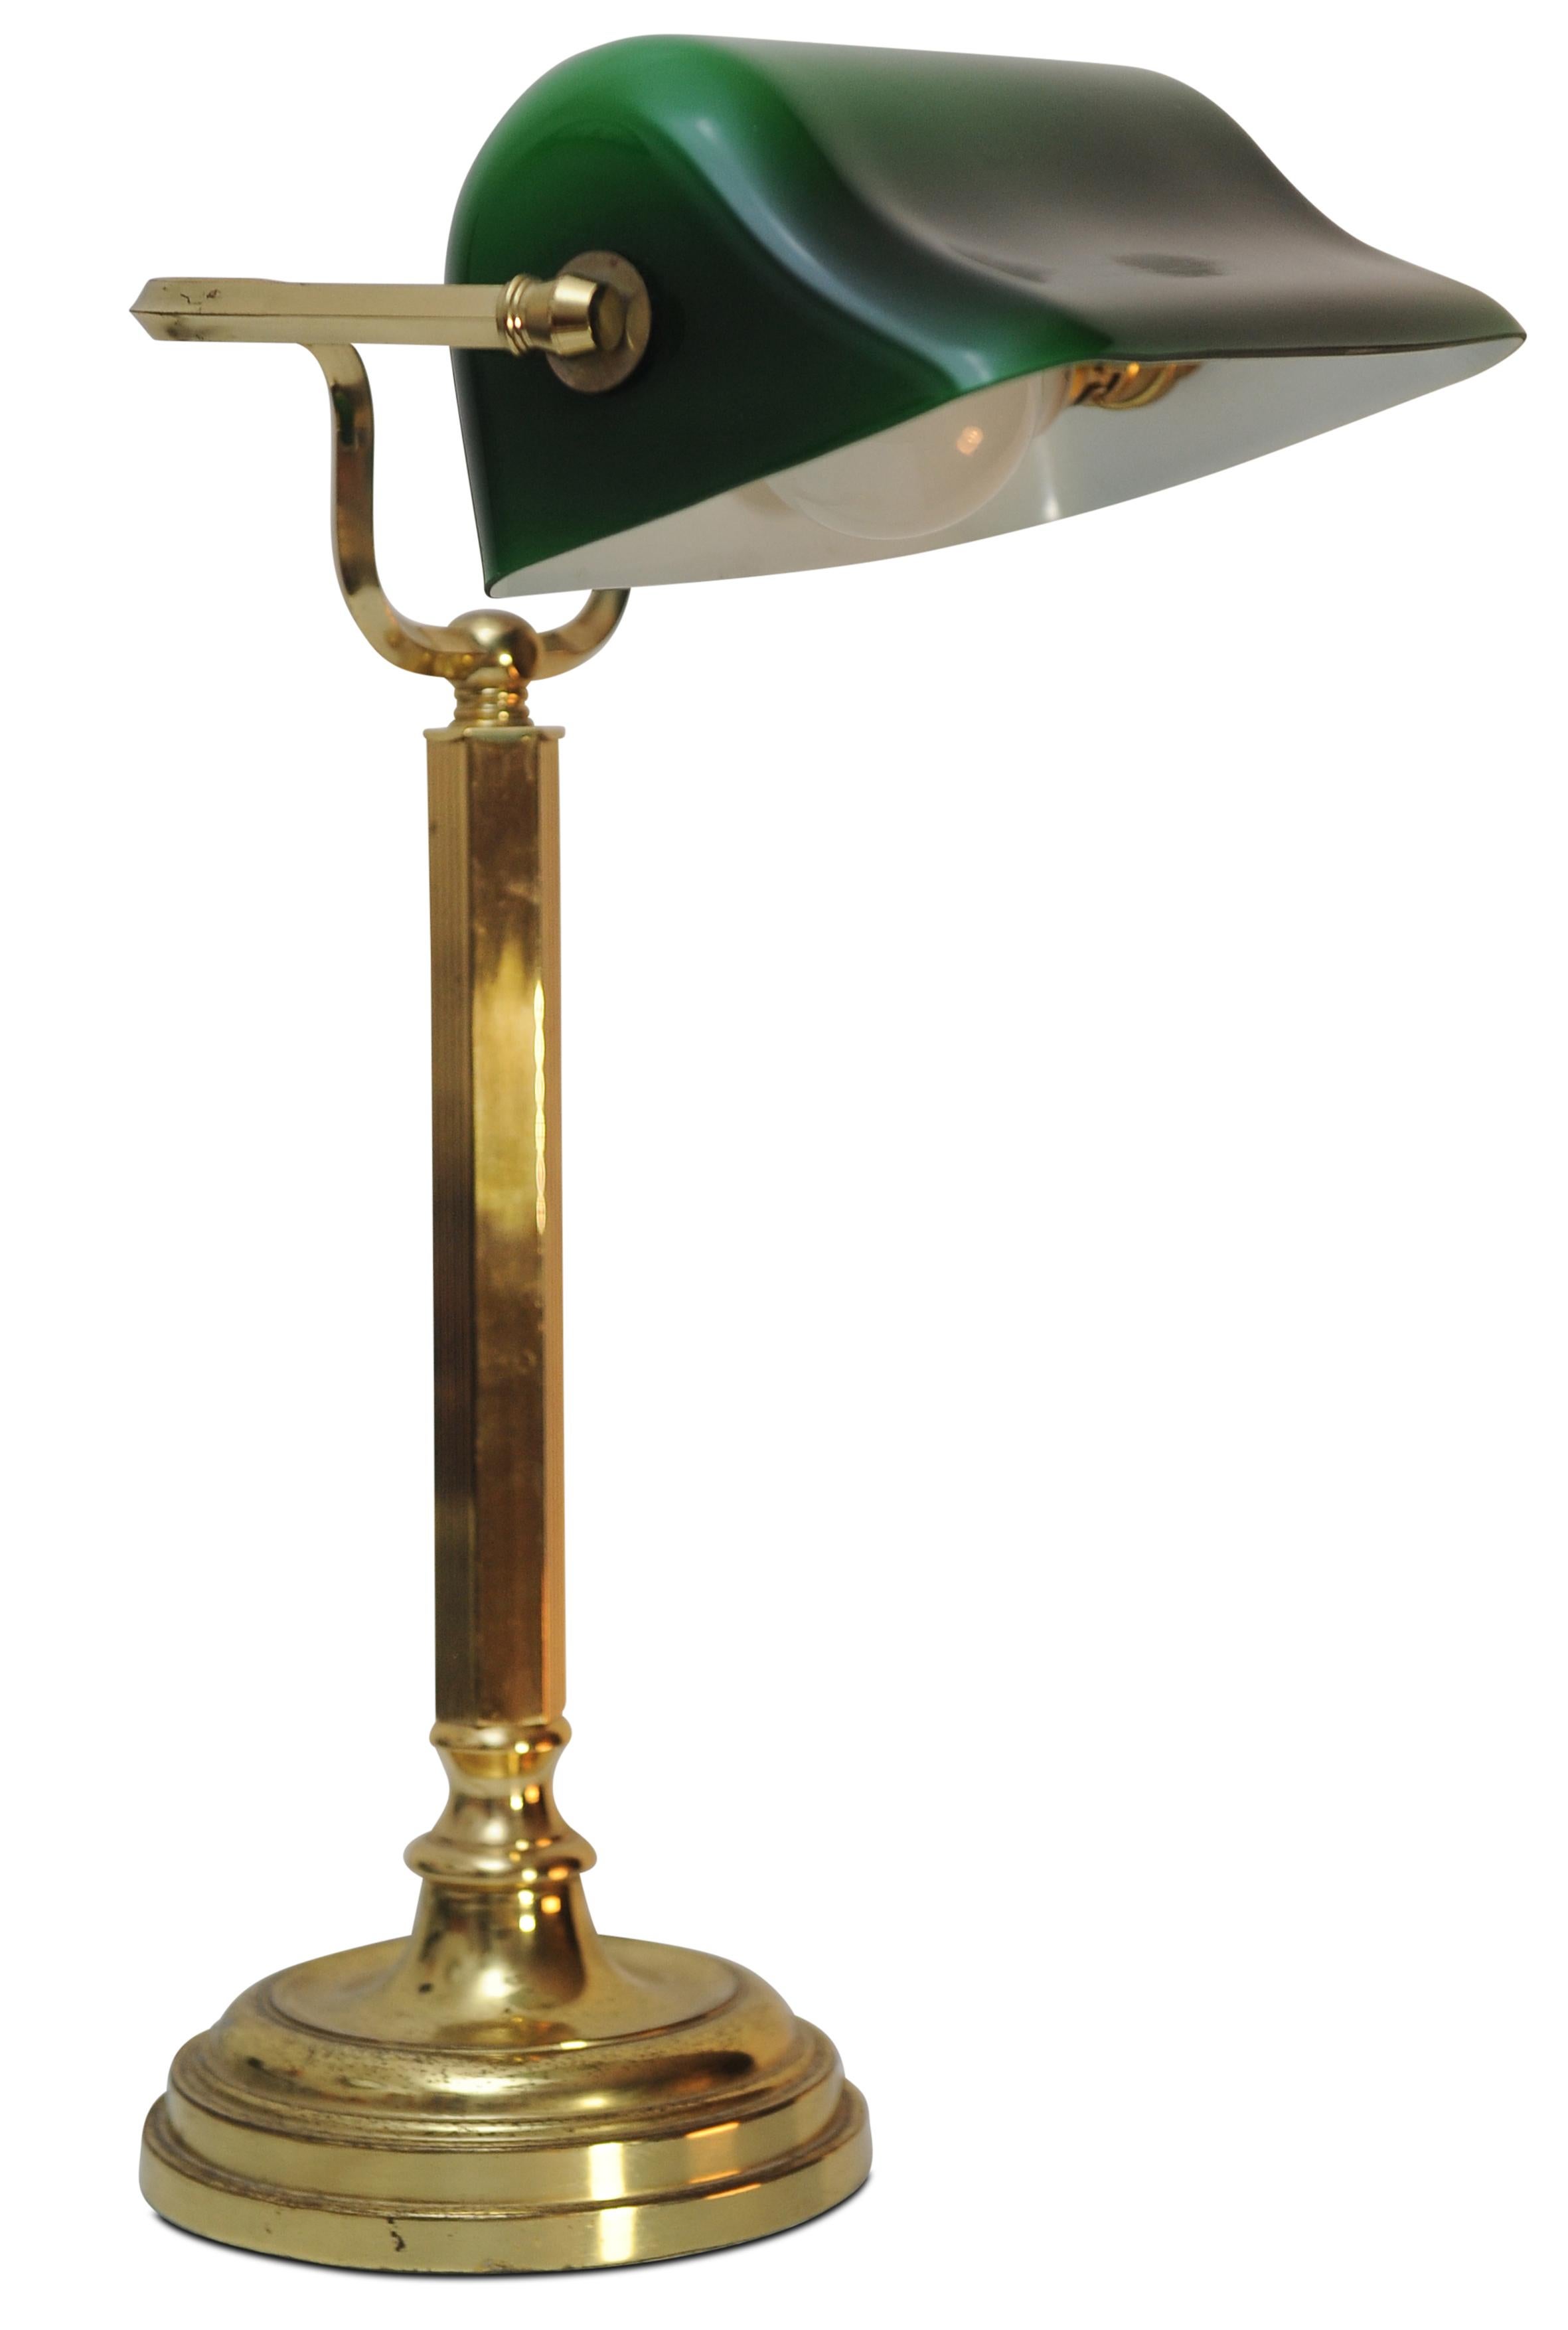 Art Deco Antique Racing Green Brass Bankers Lamp With Adjustable Green Glazed Shade  For Sale